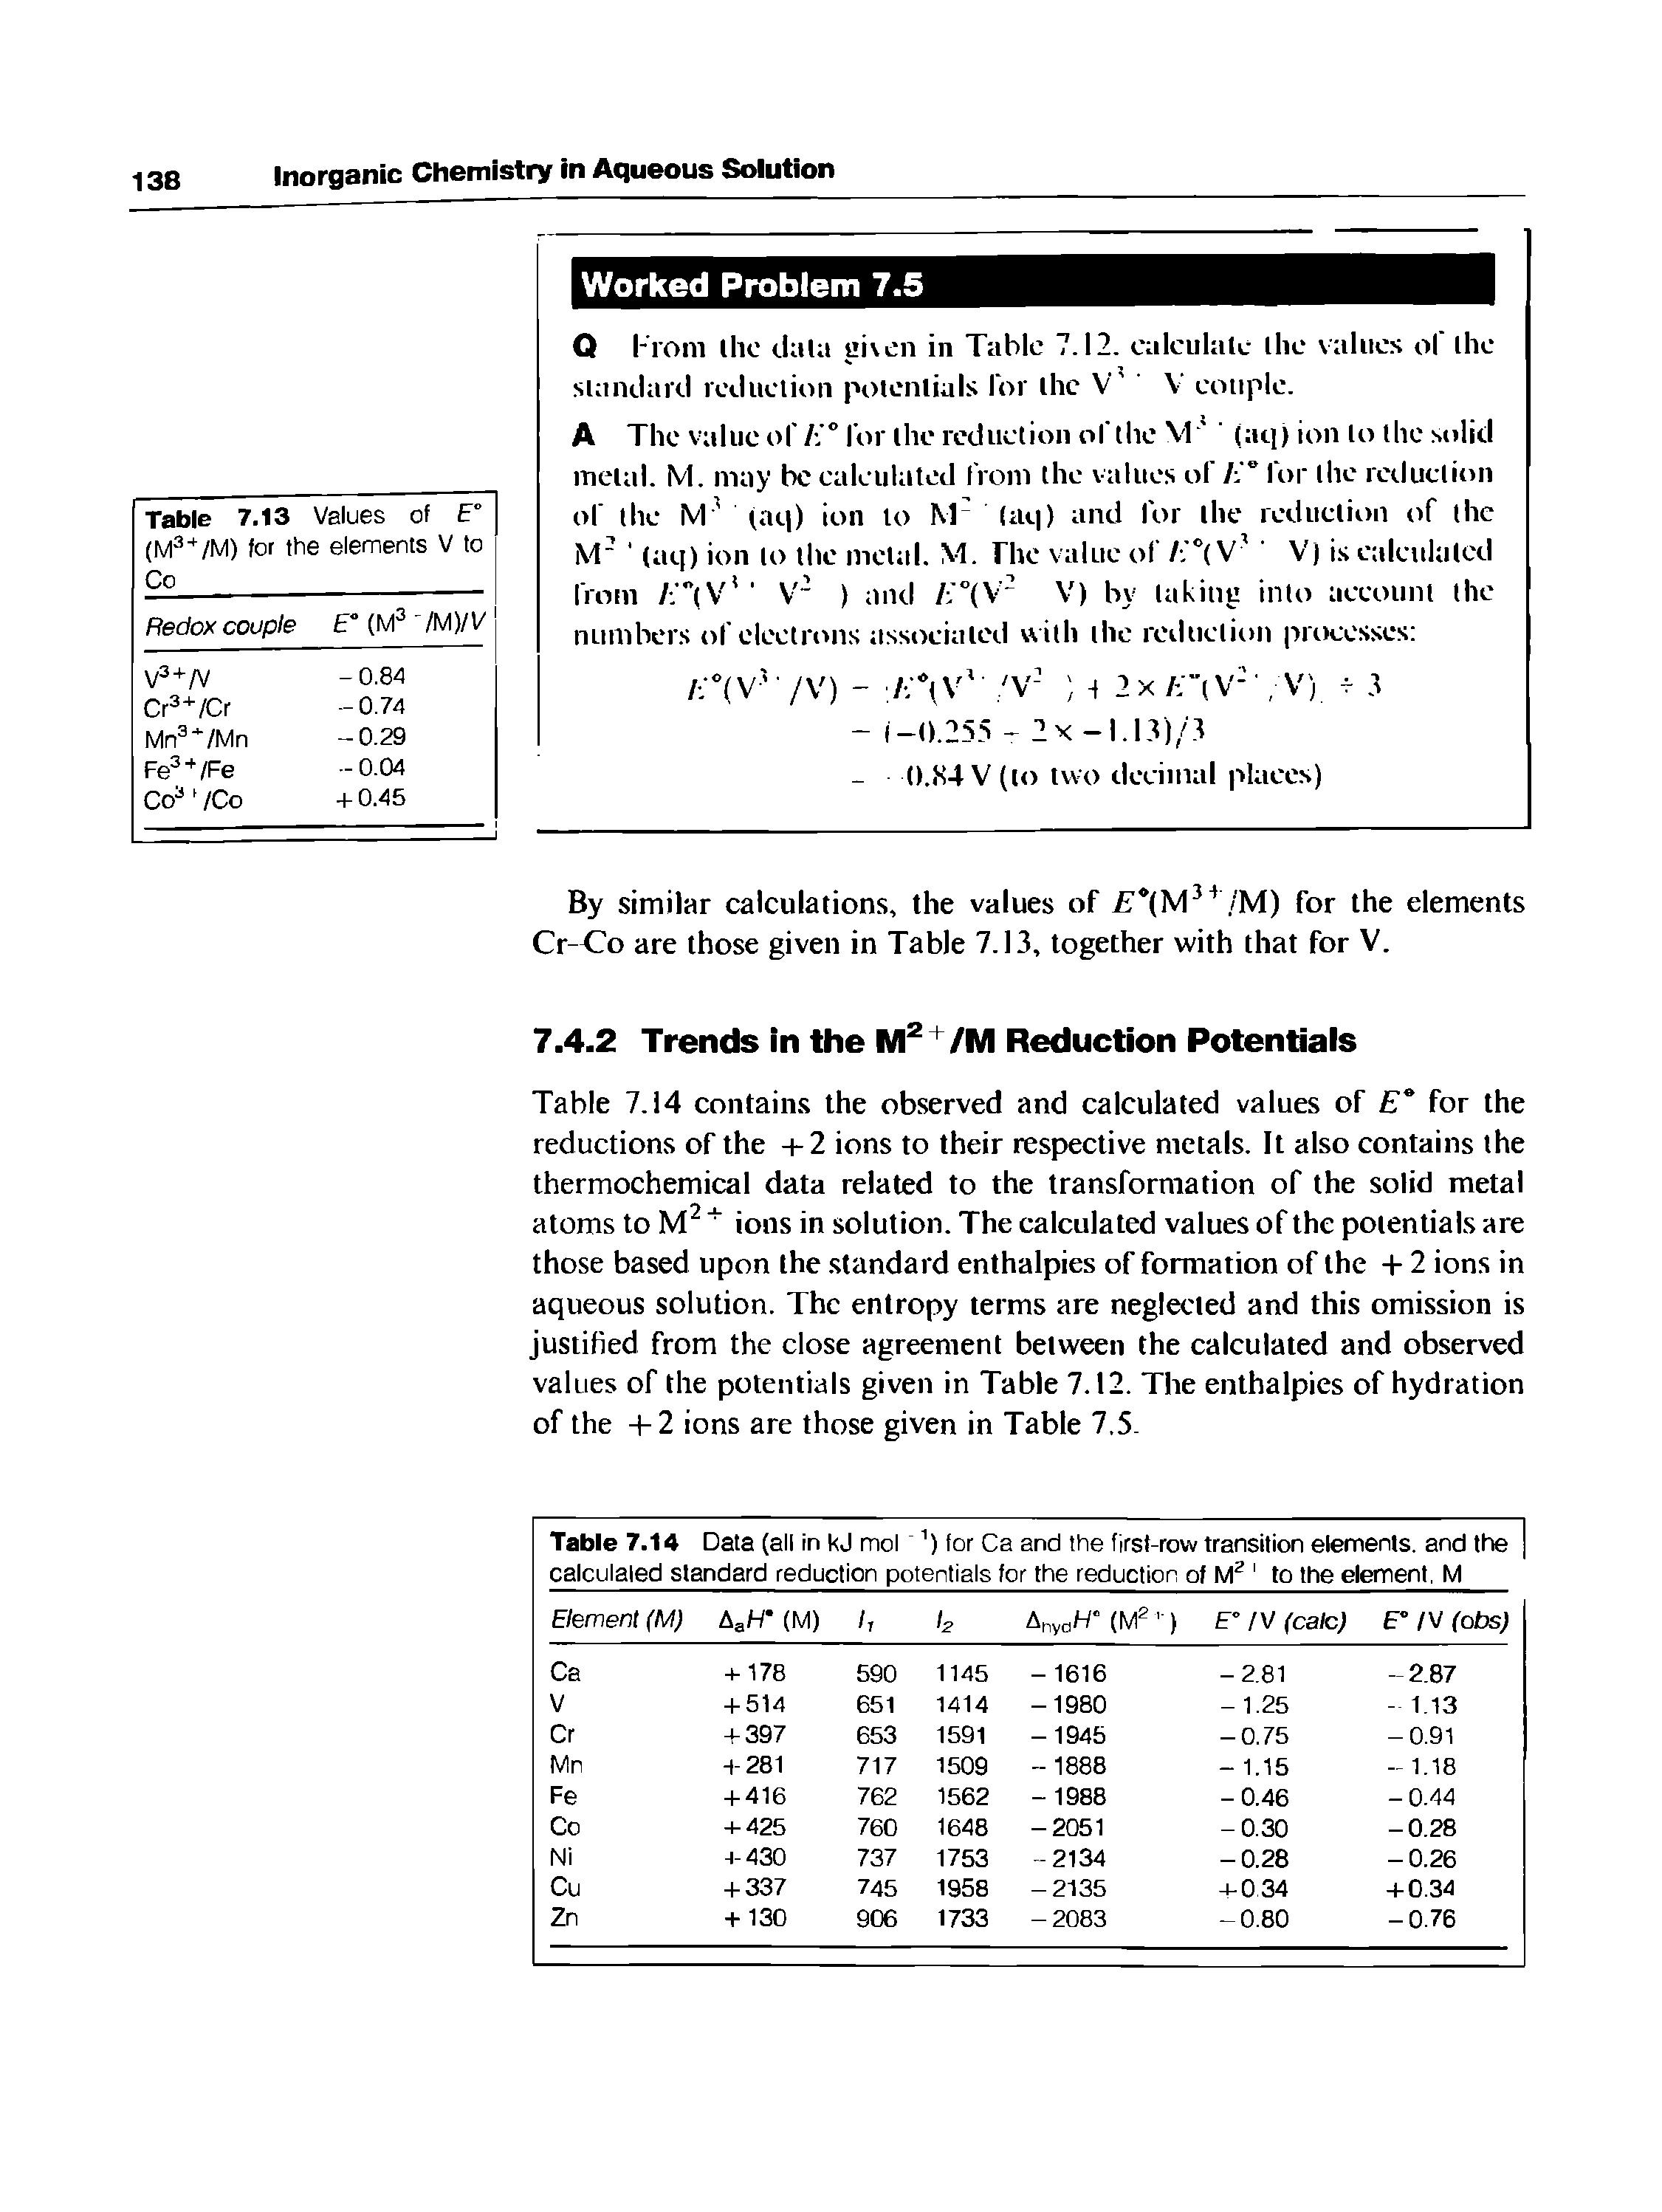 Table 7.14 contains the observed and calculated values of Ea for the reductions of the +2 ions to their respective metals. It also contains the thermochemical data related to the transformation of the solid metal atoms to M2 + ions in solution. The calculated values of the potentials are those based upon the standard enthalpies of formation of the + 2 ions in aqueous solution. The entropy terms are neglected and this omission is justified from the close agreement between the calculated and observed values of the potentials given in Table 7.12. The enthalpies of hydration of the +2 ions are those given in Table 7.5.